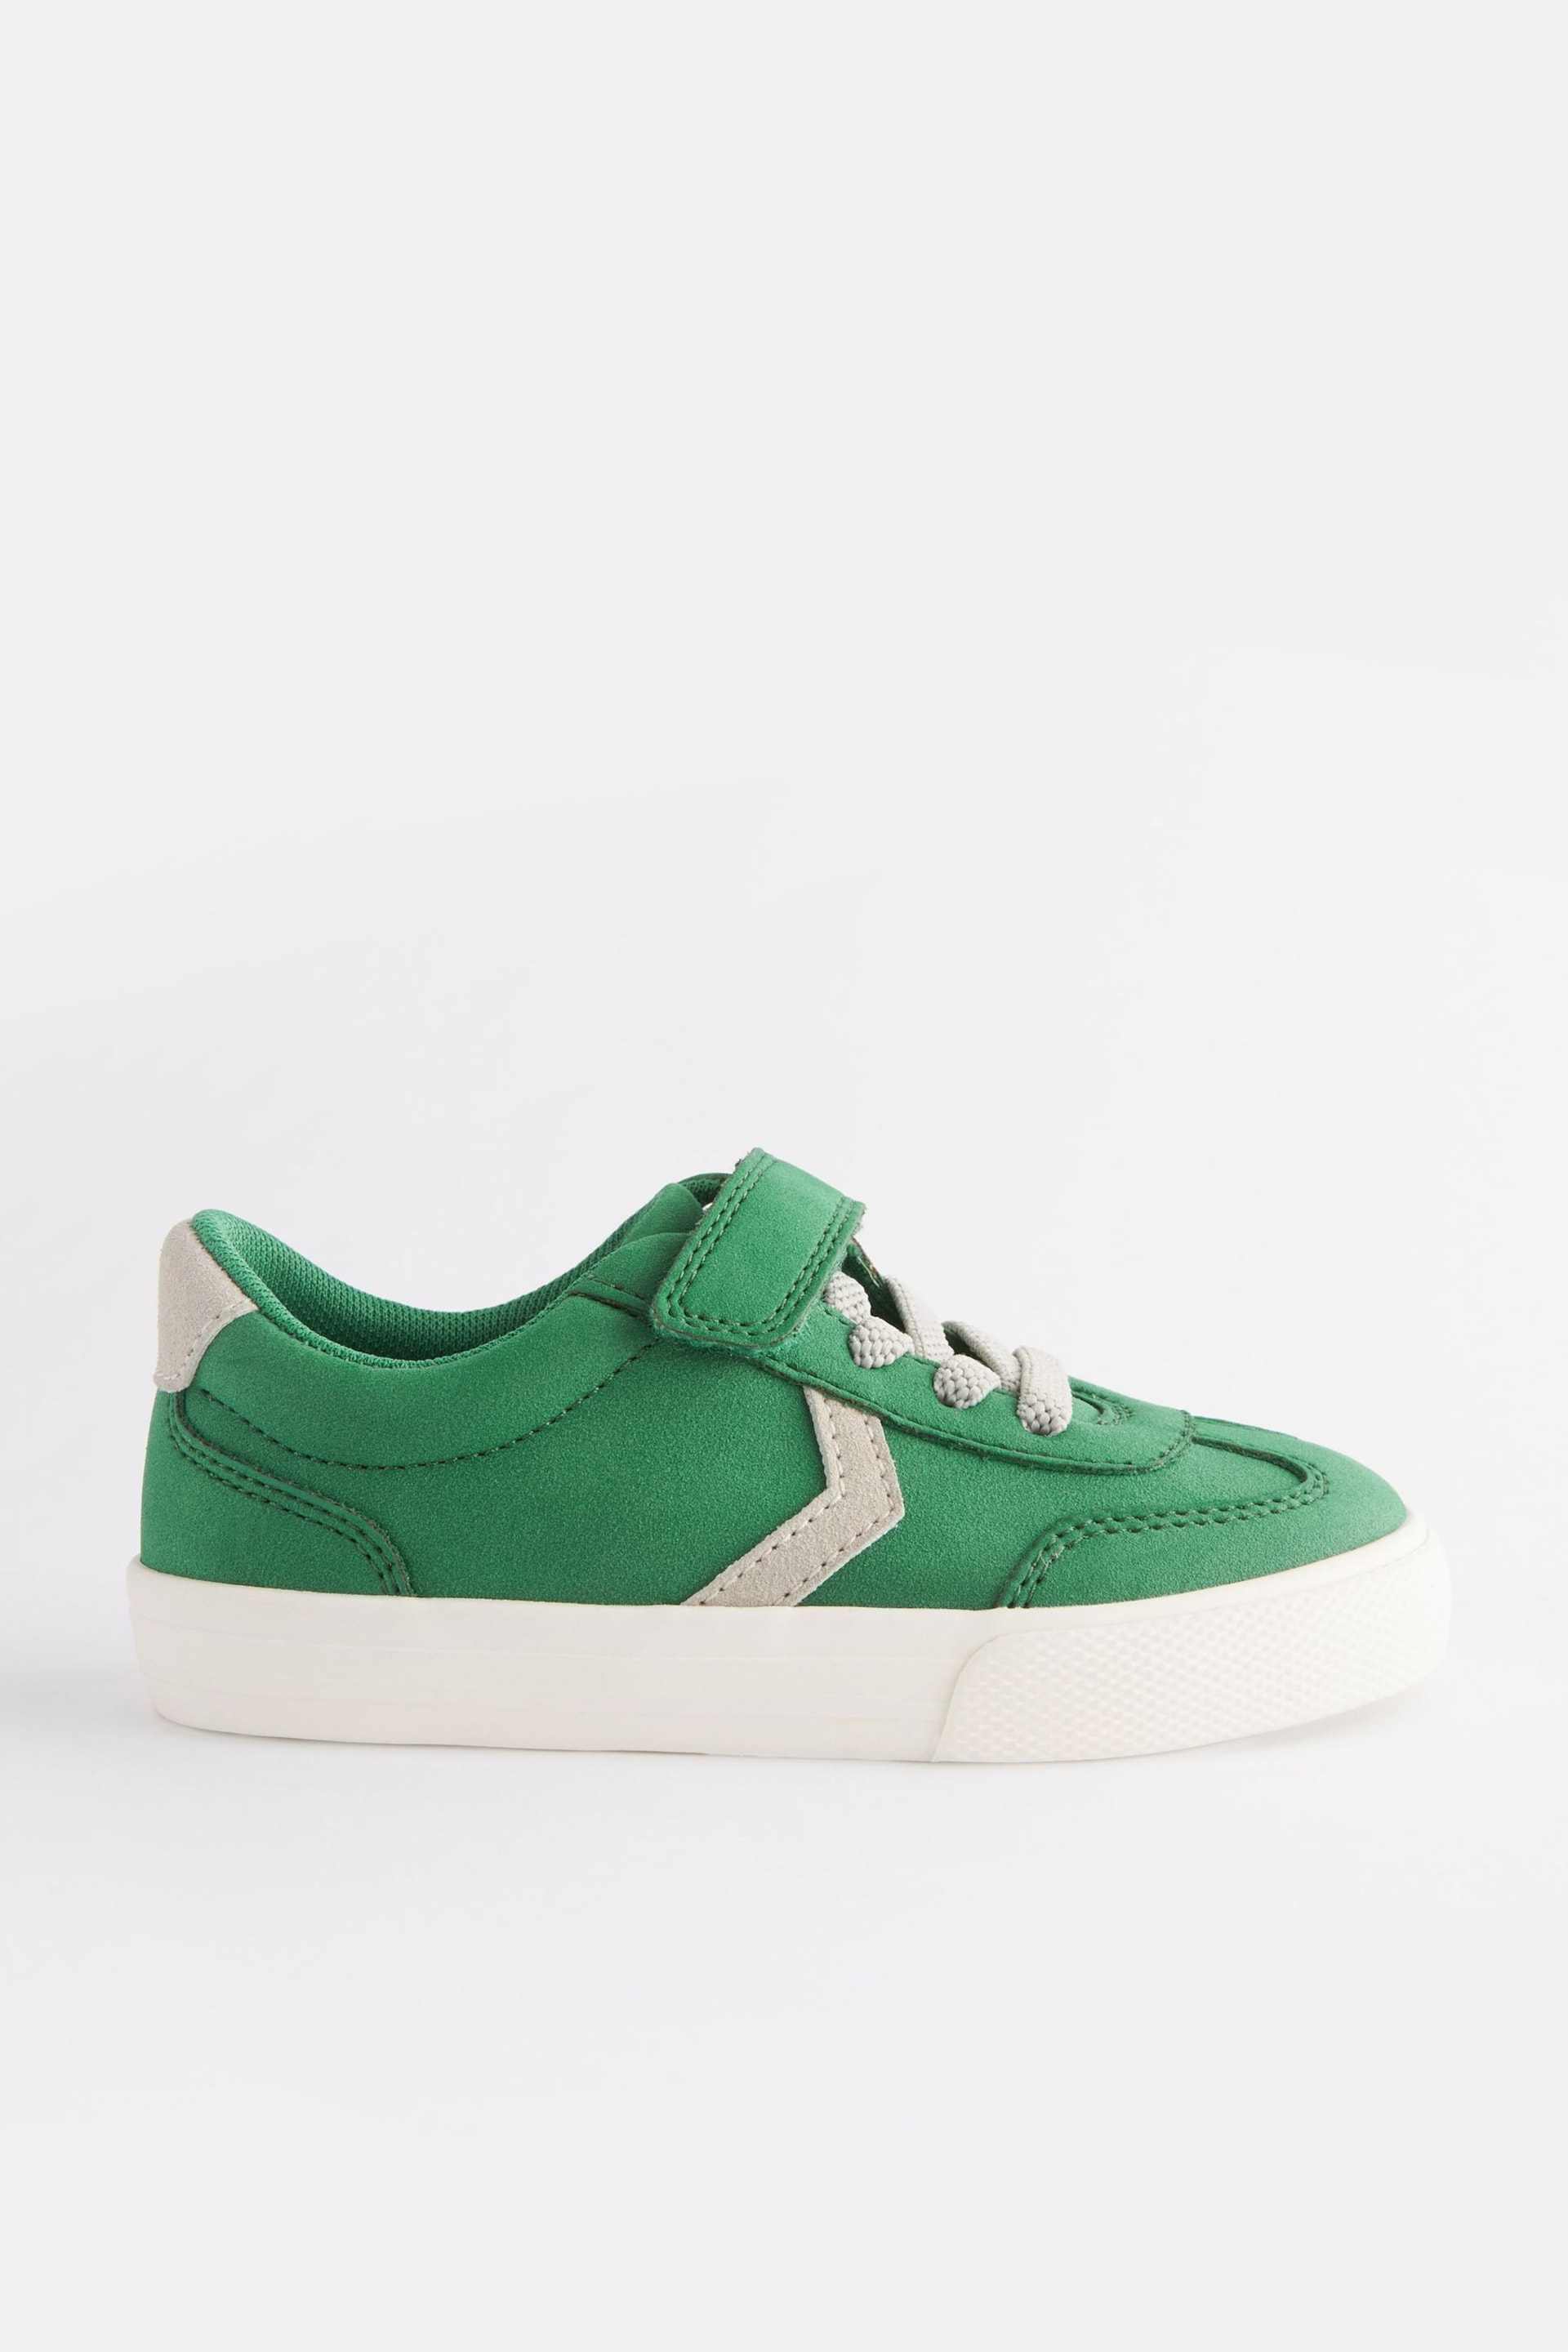 Green Standard Fit (F) Touch Fastening Chevron Trainers - Image 5 of 8